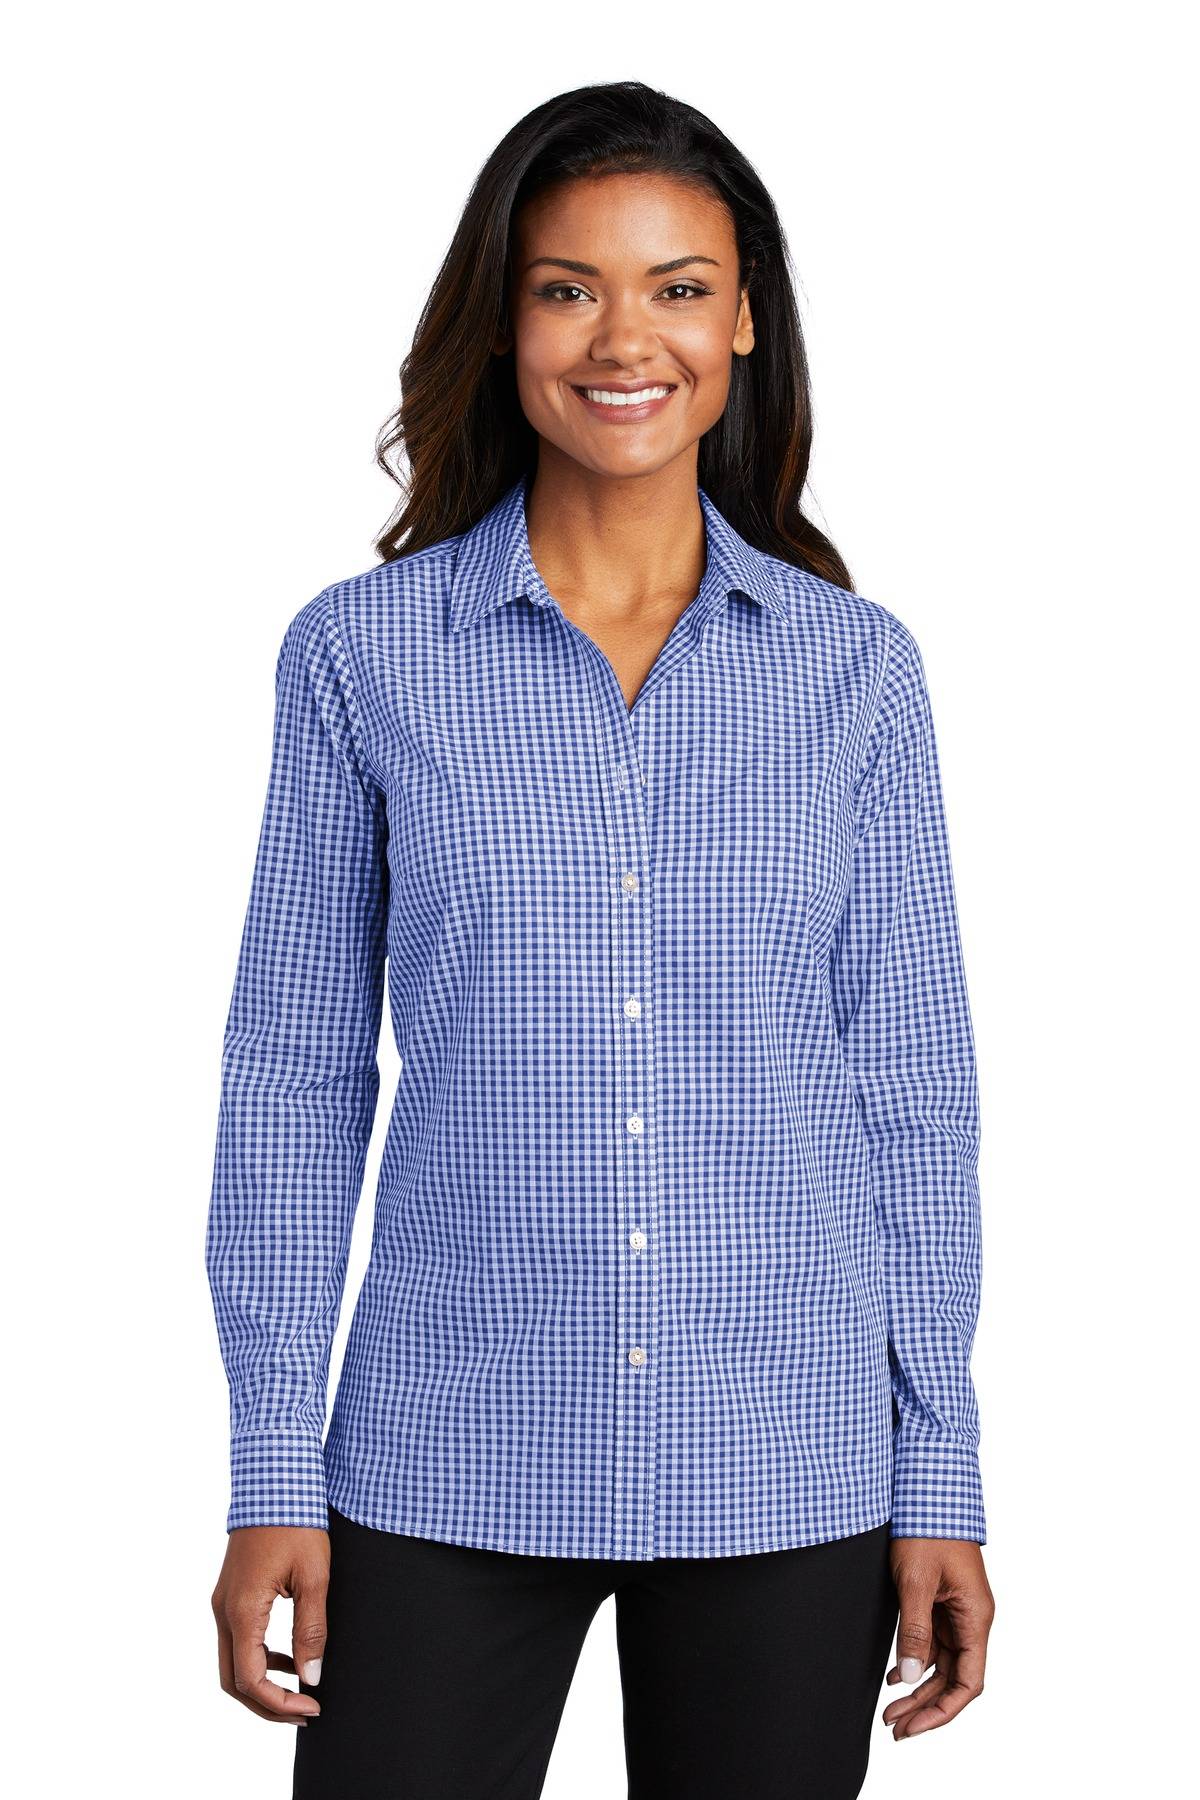 Port Authority LW644 Womens Long Sleeve Broadcloth Gingham Easy Care Wrinkle Resistant Shirt